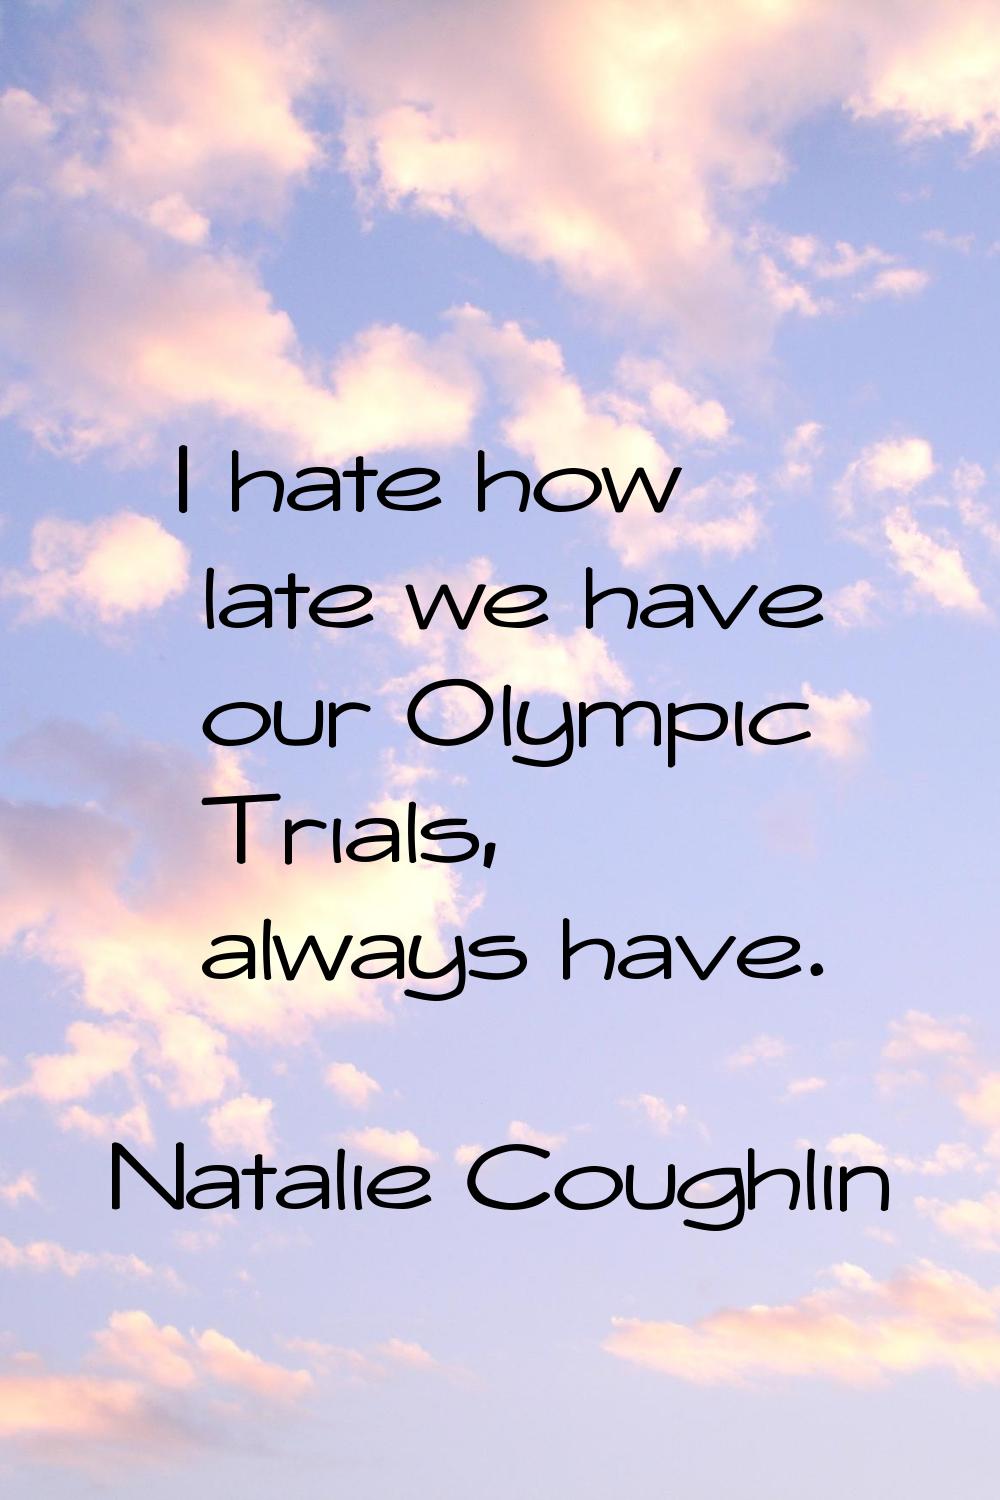 I hate how late we have our Olympic Trials, always have.